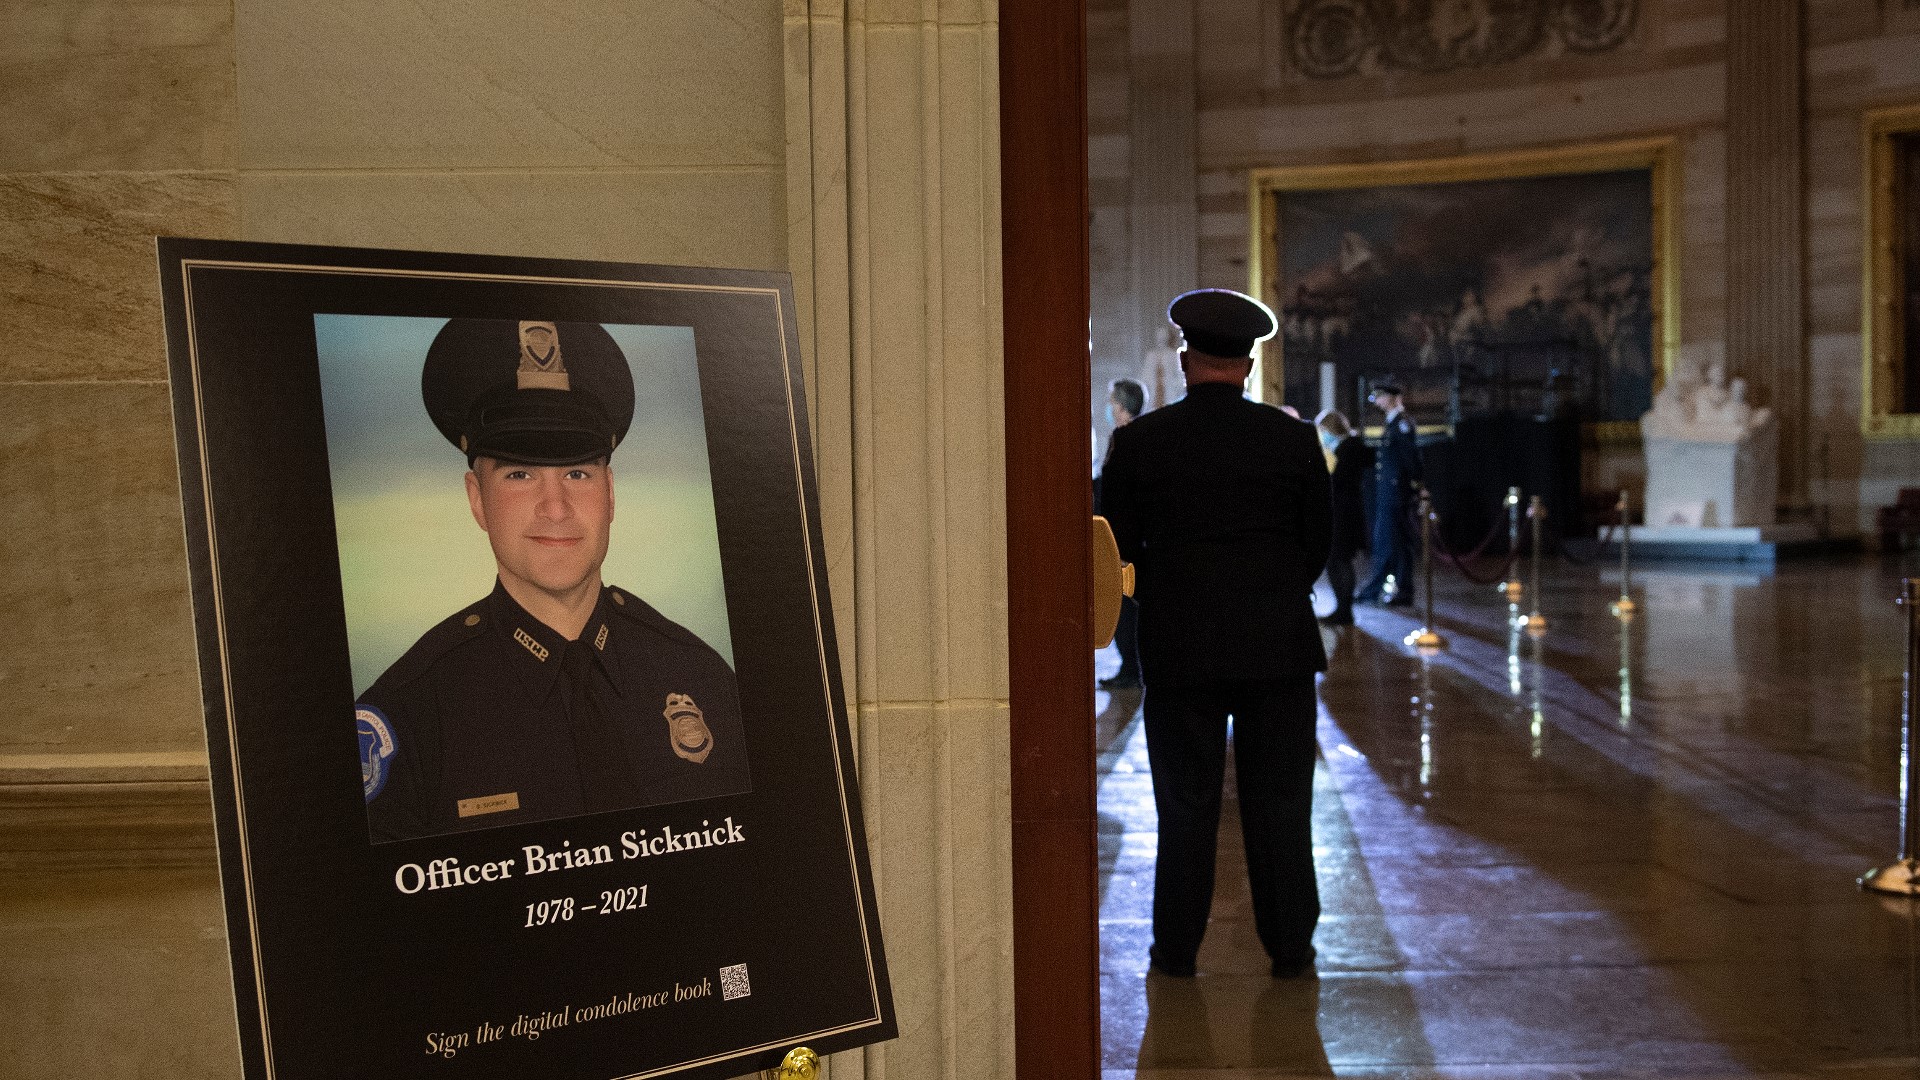 An official cause of death for Officer Brian Sicknick has not been released.